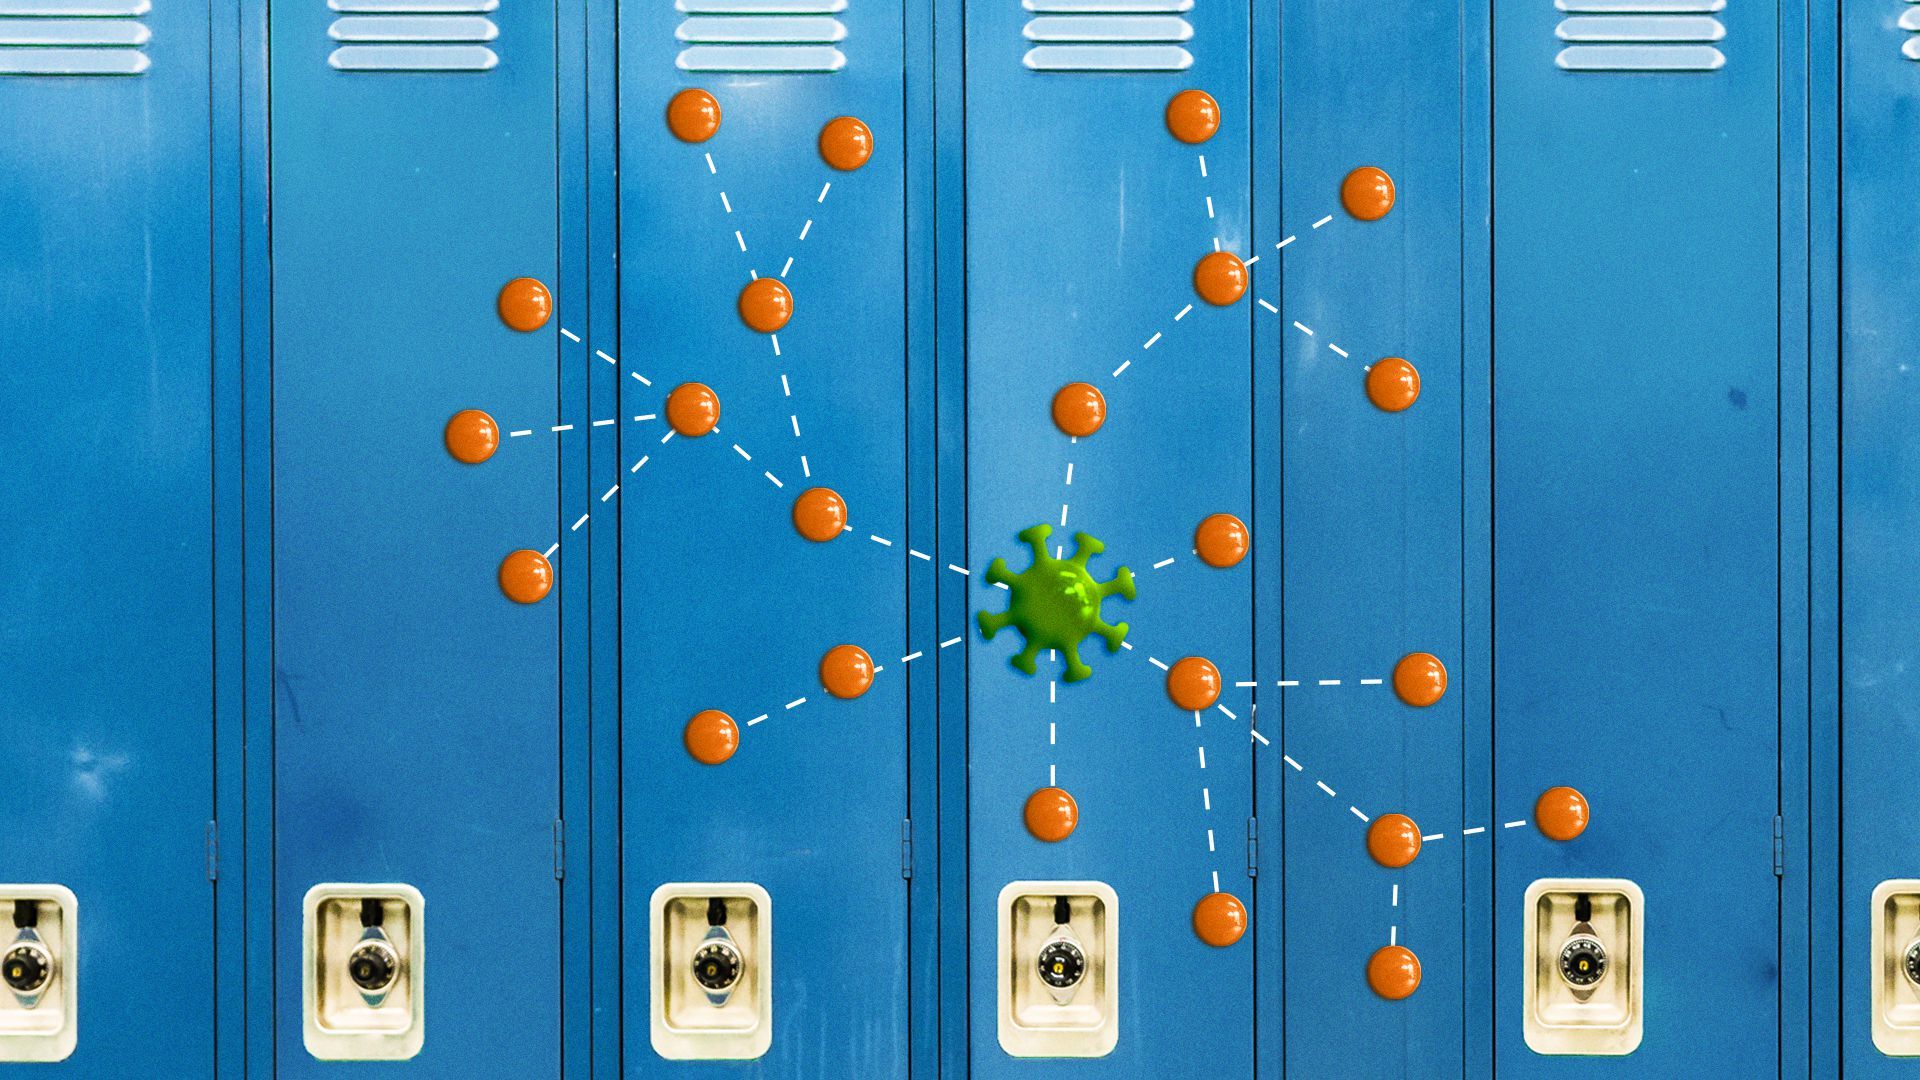 Magnets on a school locker in the shape of a contact tracing chart.